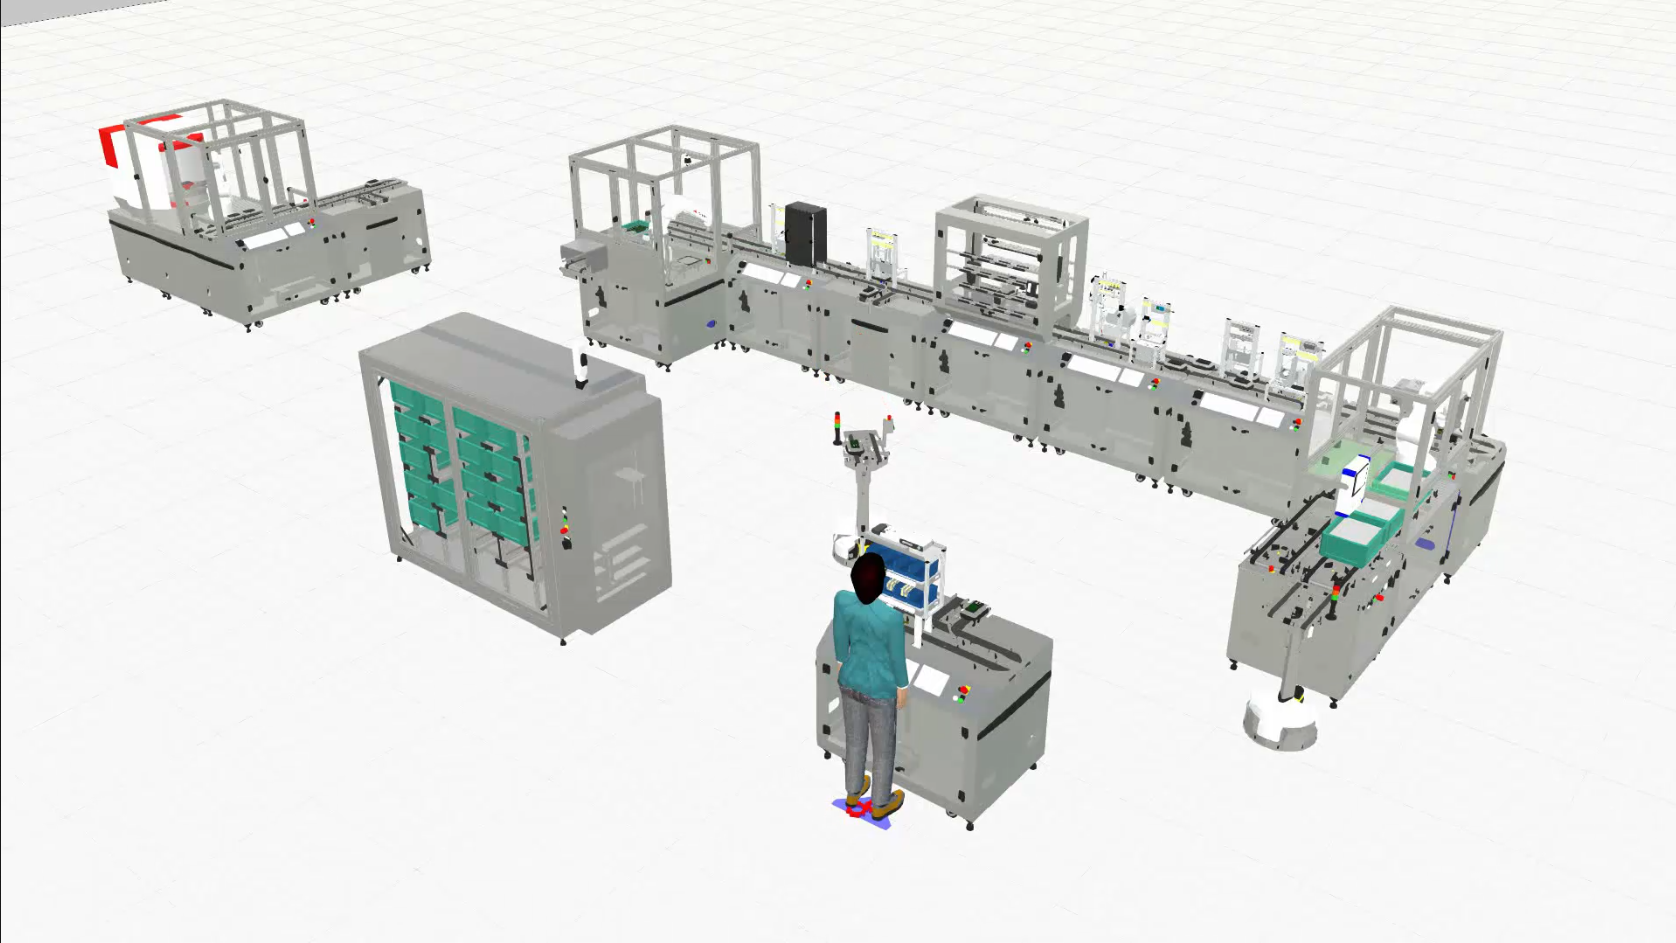 3D Simulation of IoT Test Bed